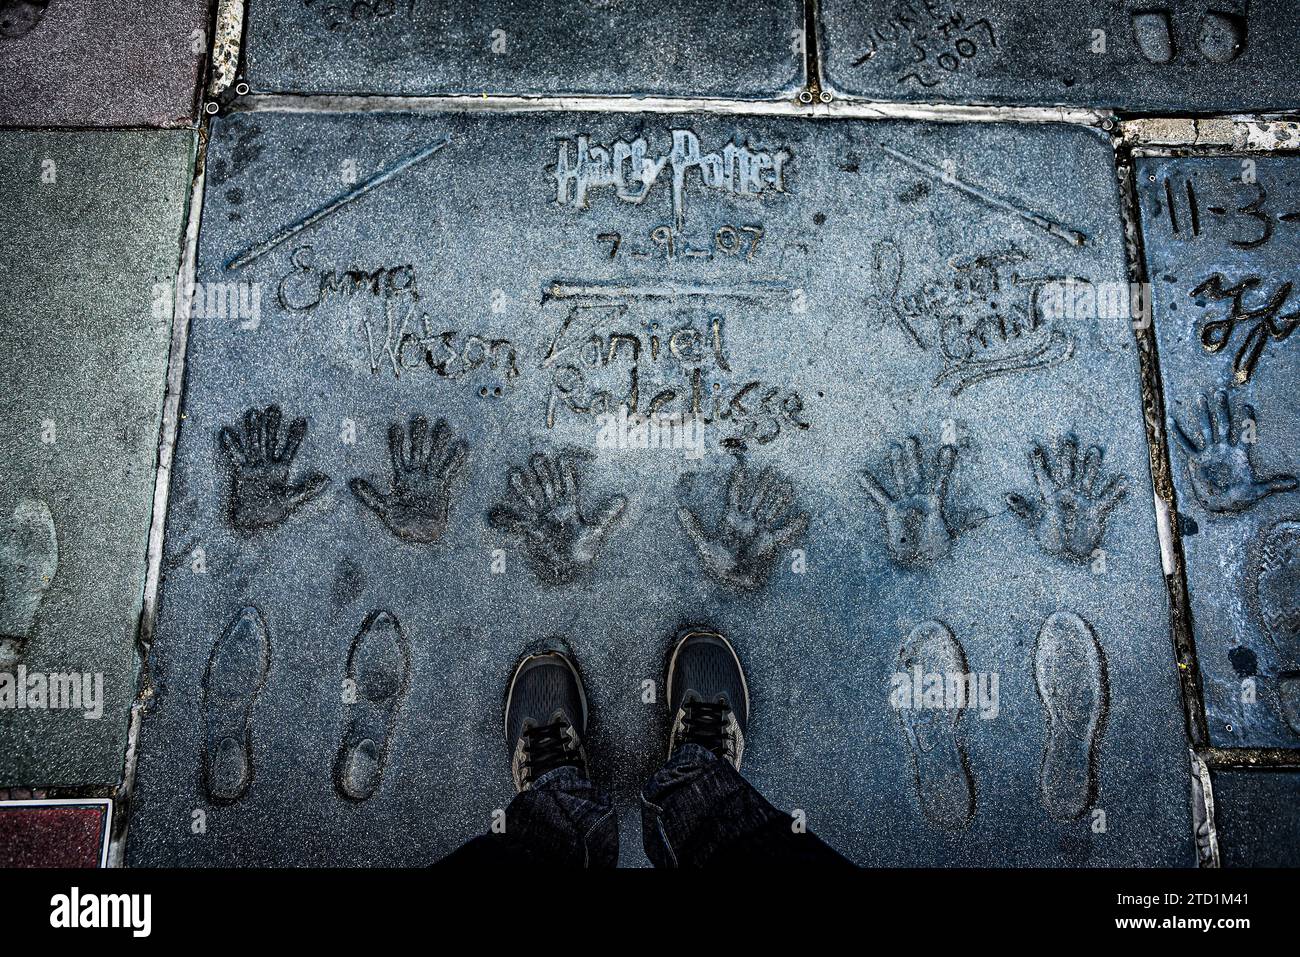 Standing by Harry Potter Cast Handprints in the Forecourt of Grauman's Chinese Theatre - Los Angeles, California Stock Photo